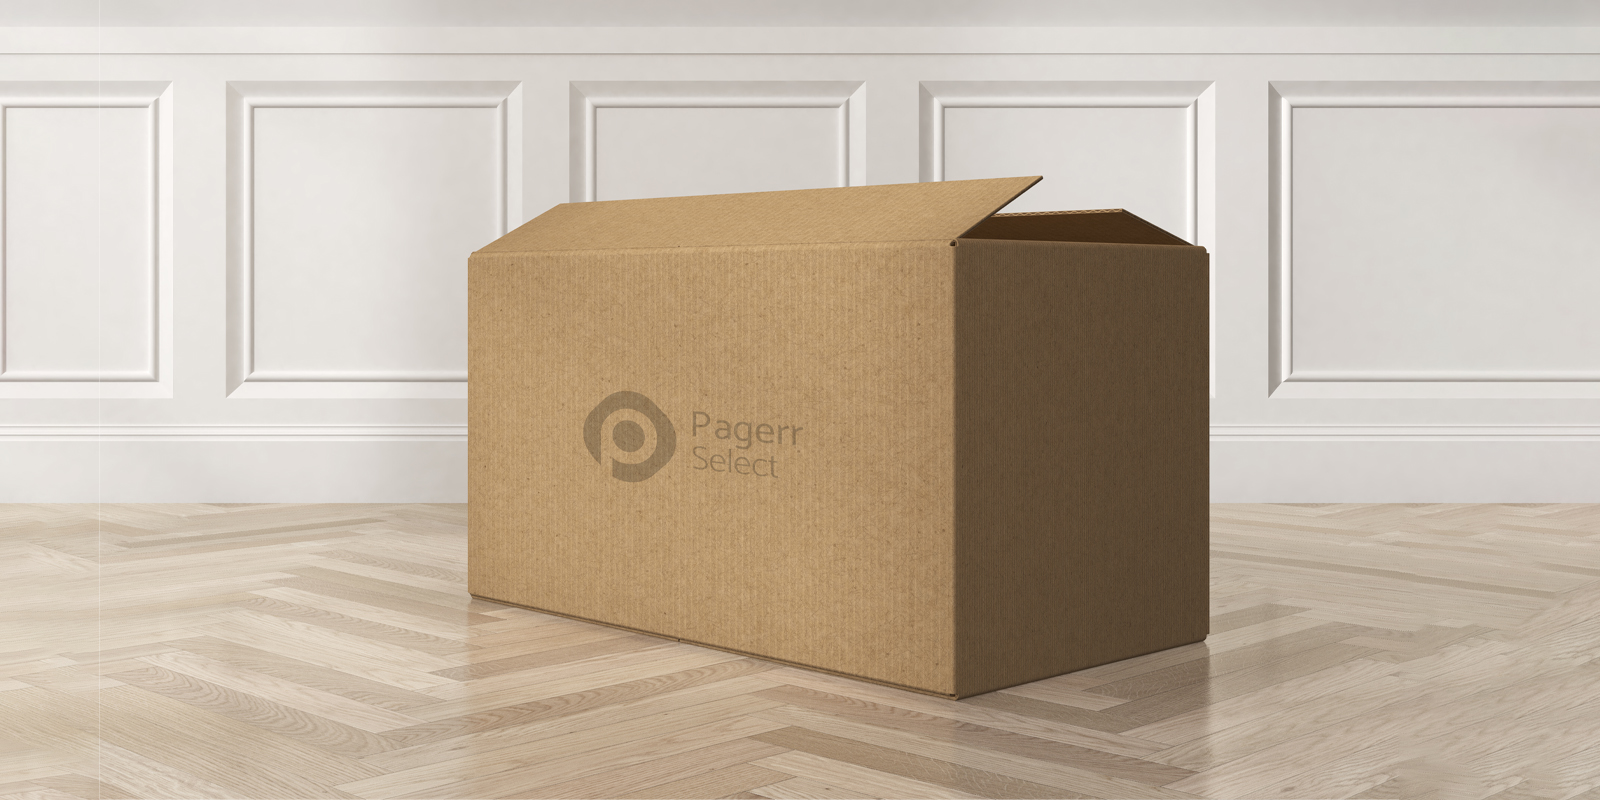 Moving boxes in Hobart - Print with Pagerr